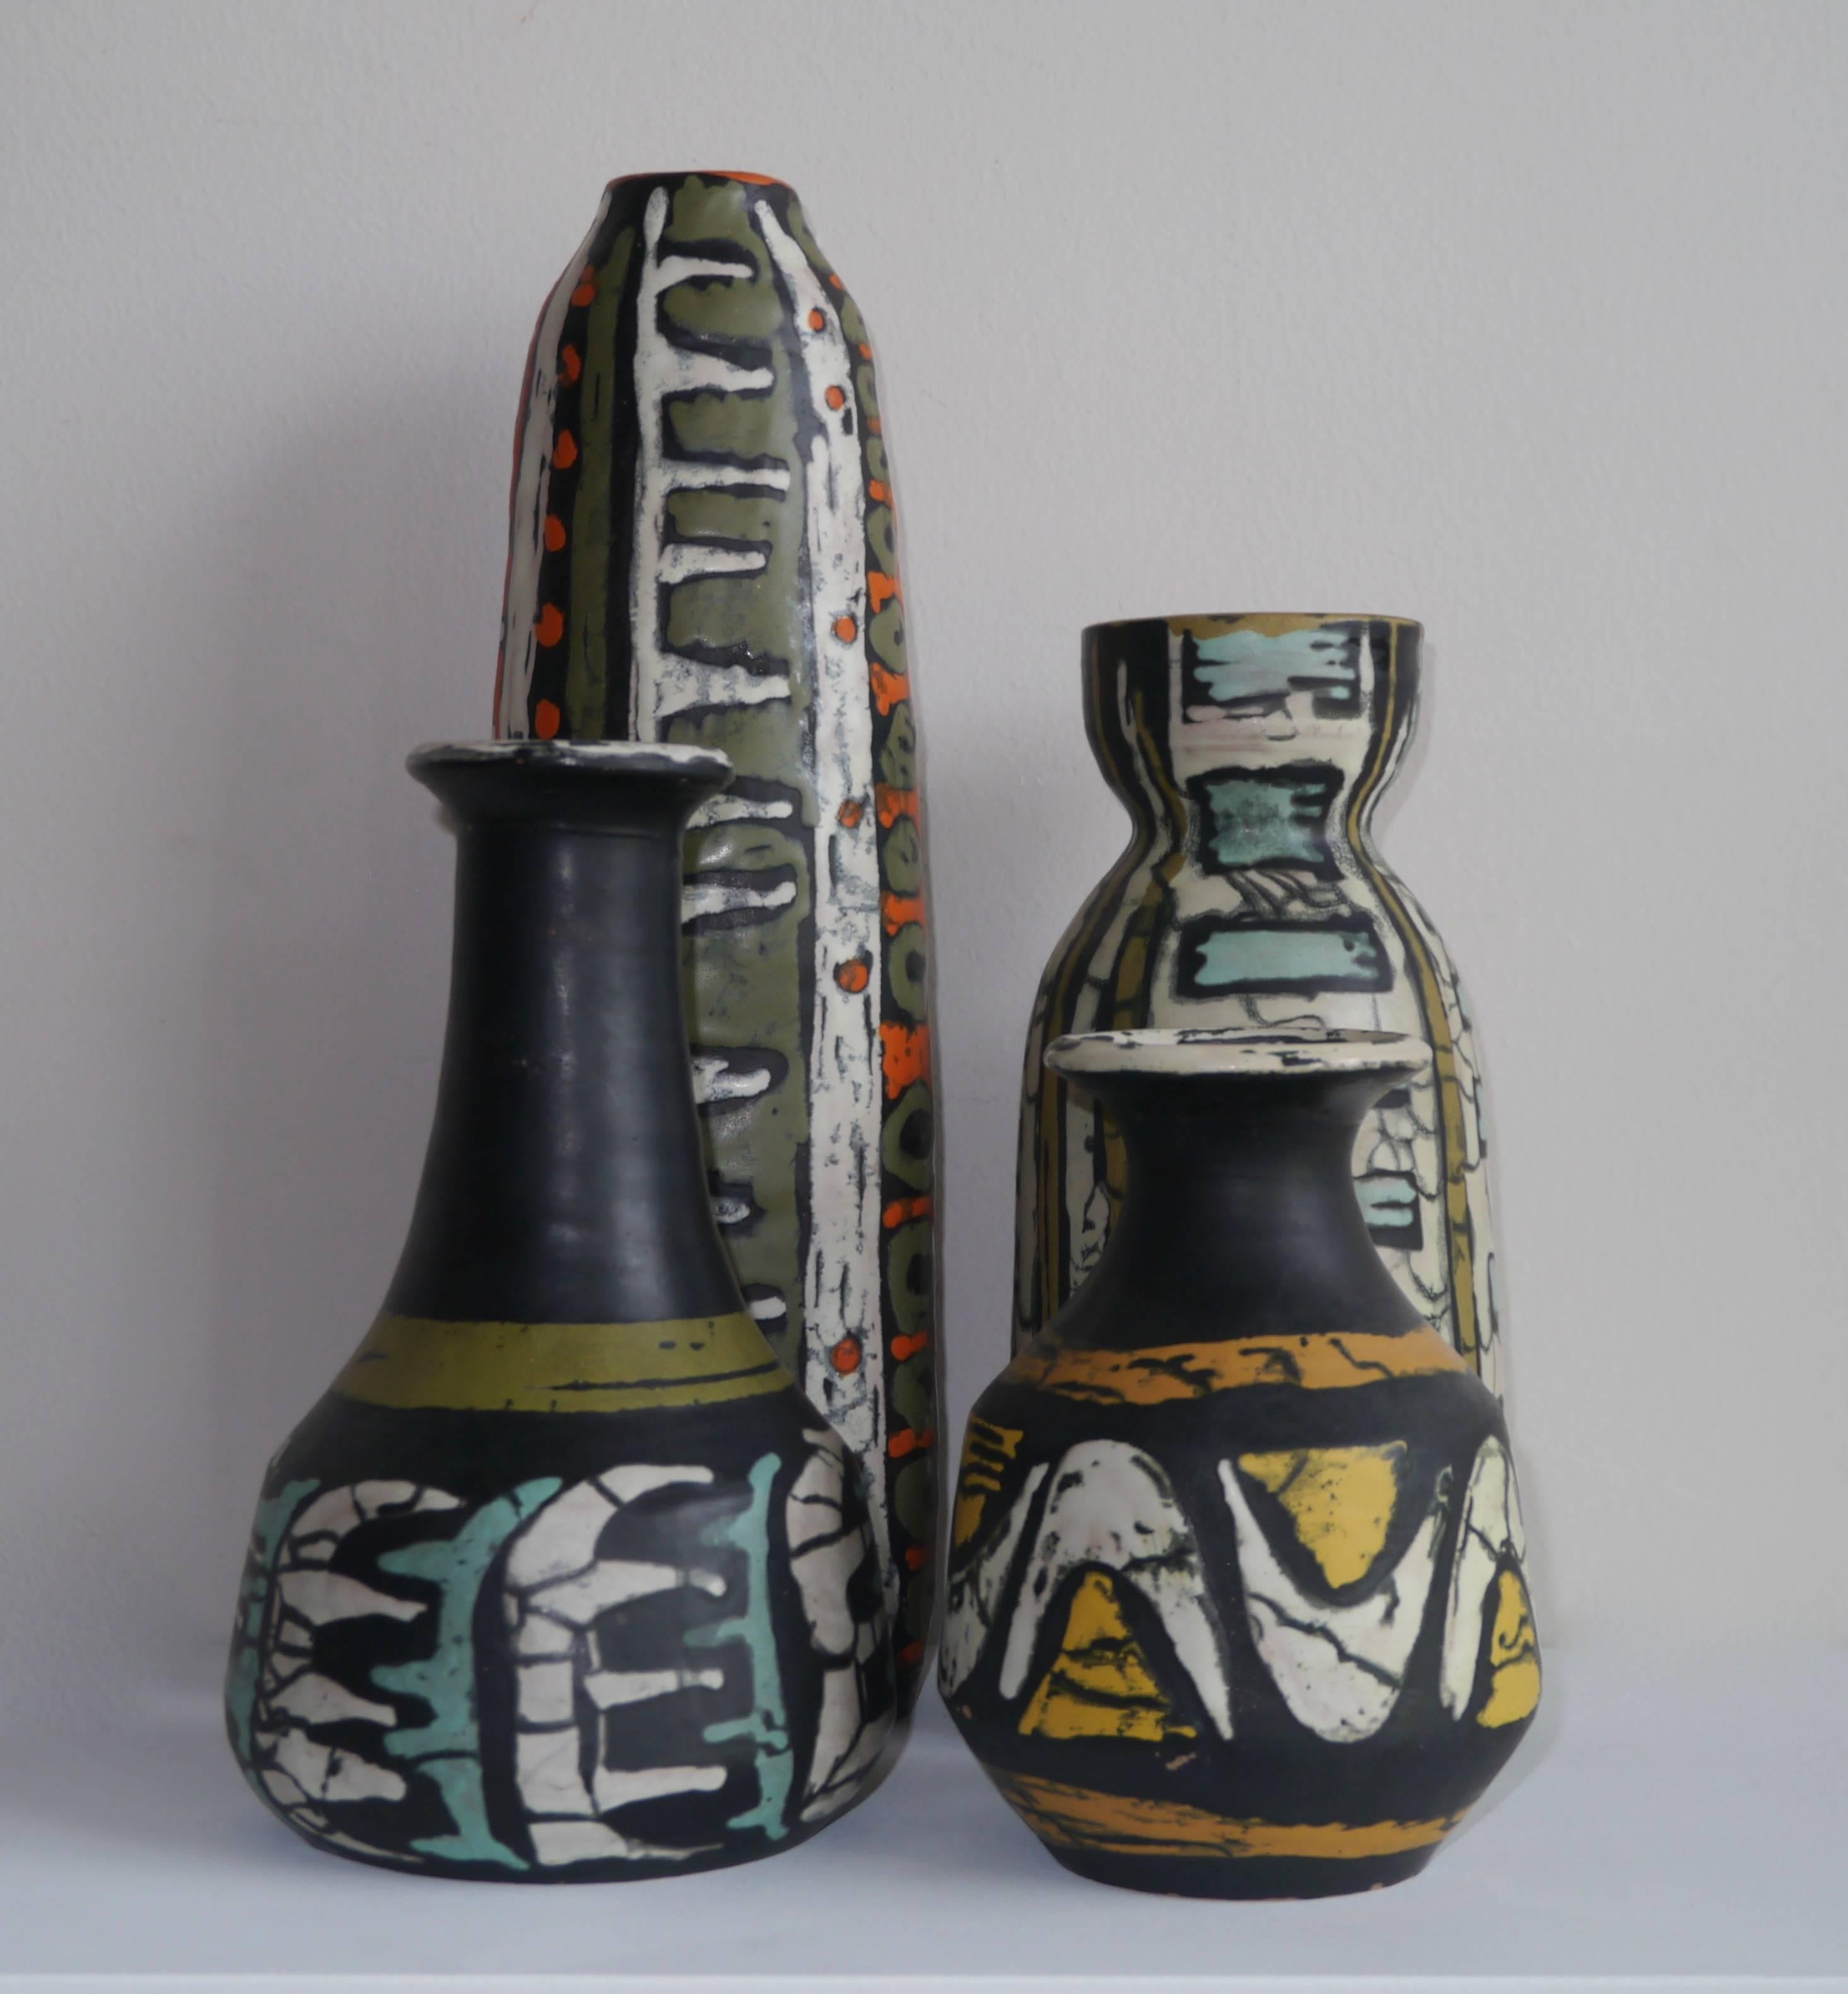 Exceptional set of decorative vases by Livia Gorka's Studio Pottery.
Each piece is hand signed.
Condition is excellent, each element comes directly from the Artist's studio.
Measurements are 16 cm /6.30 inches high for the smallest to 35 cm/13.78